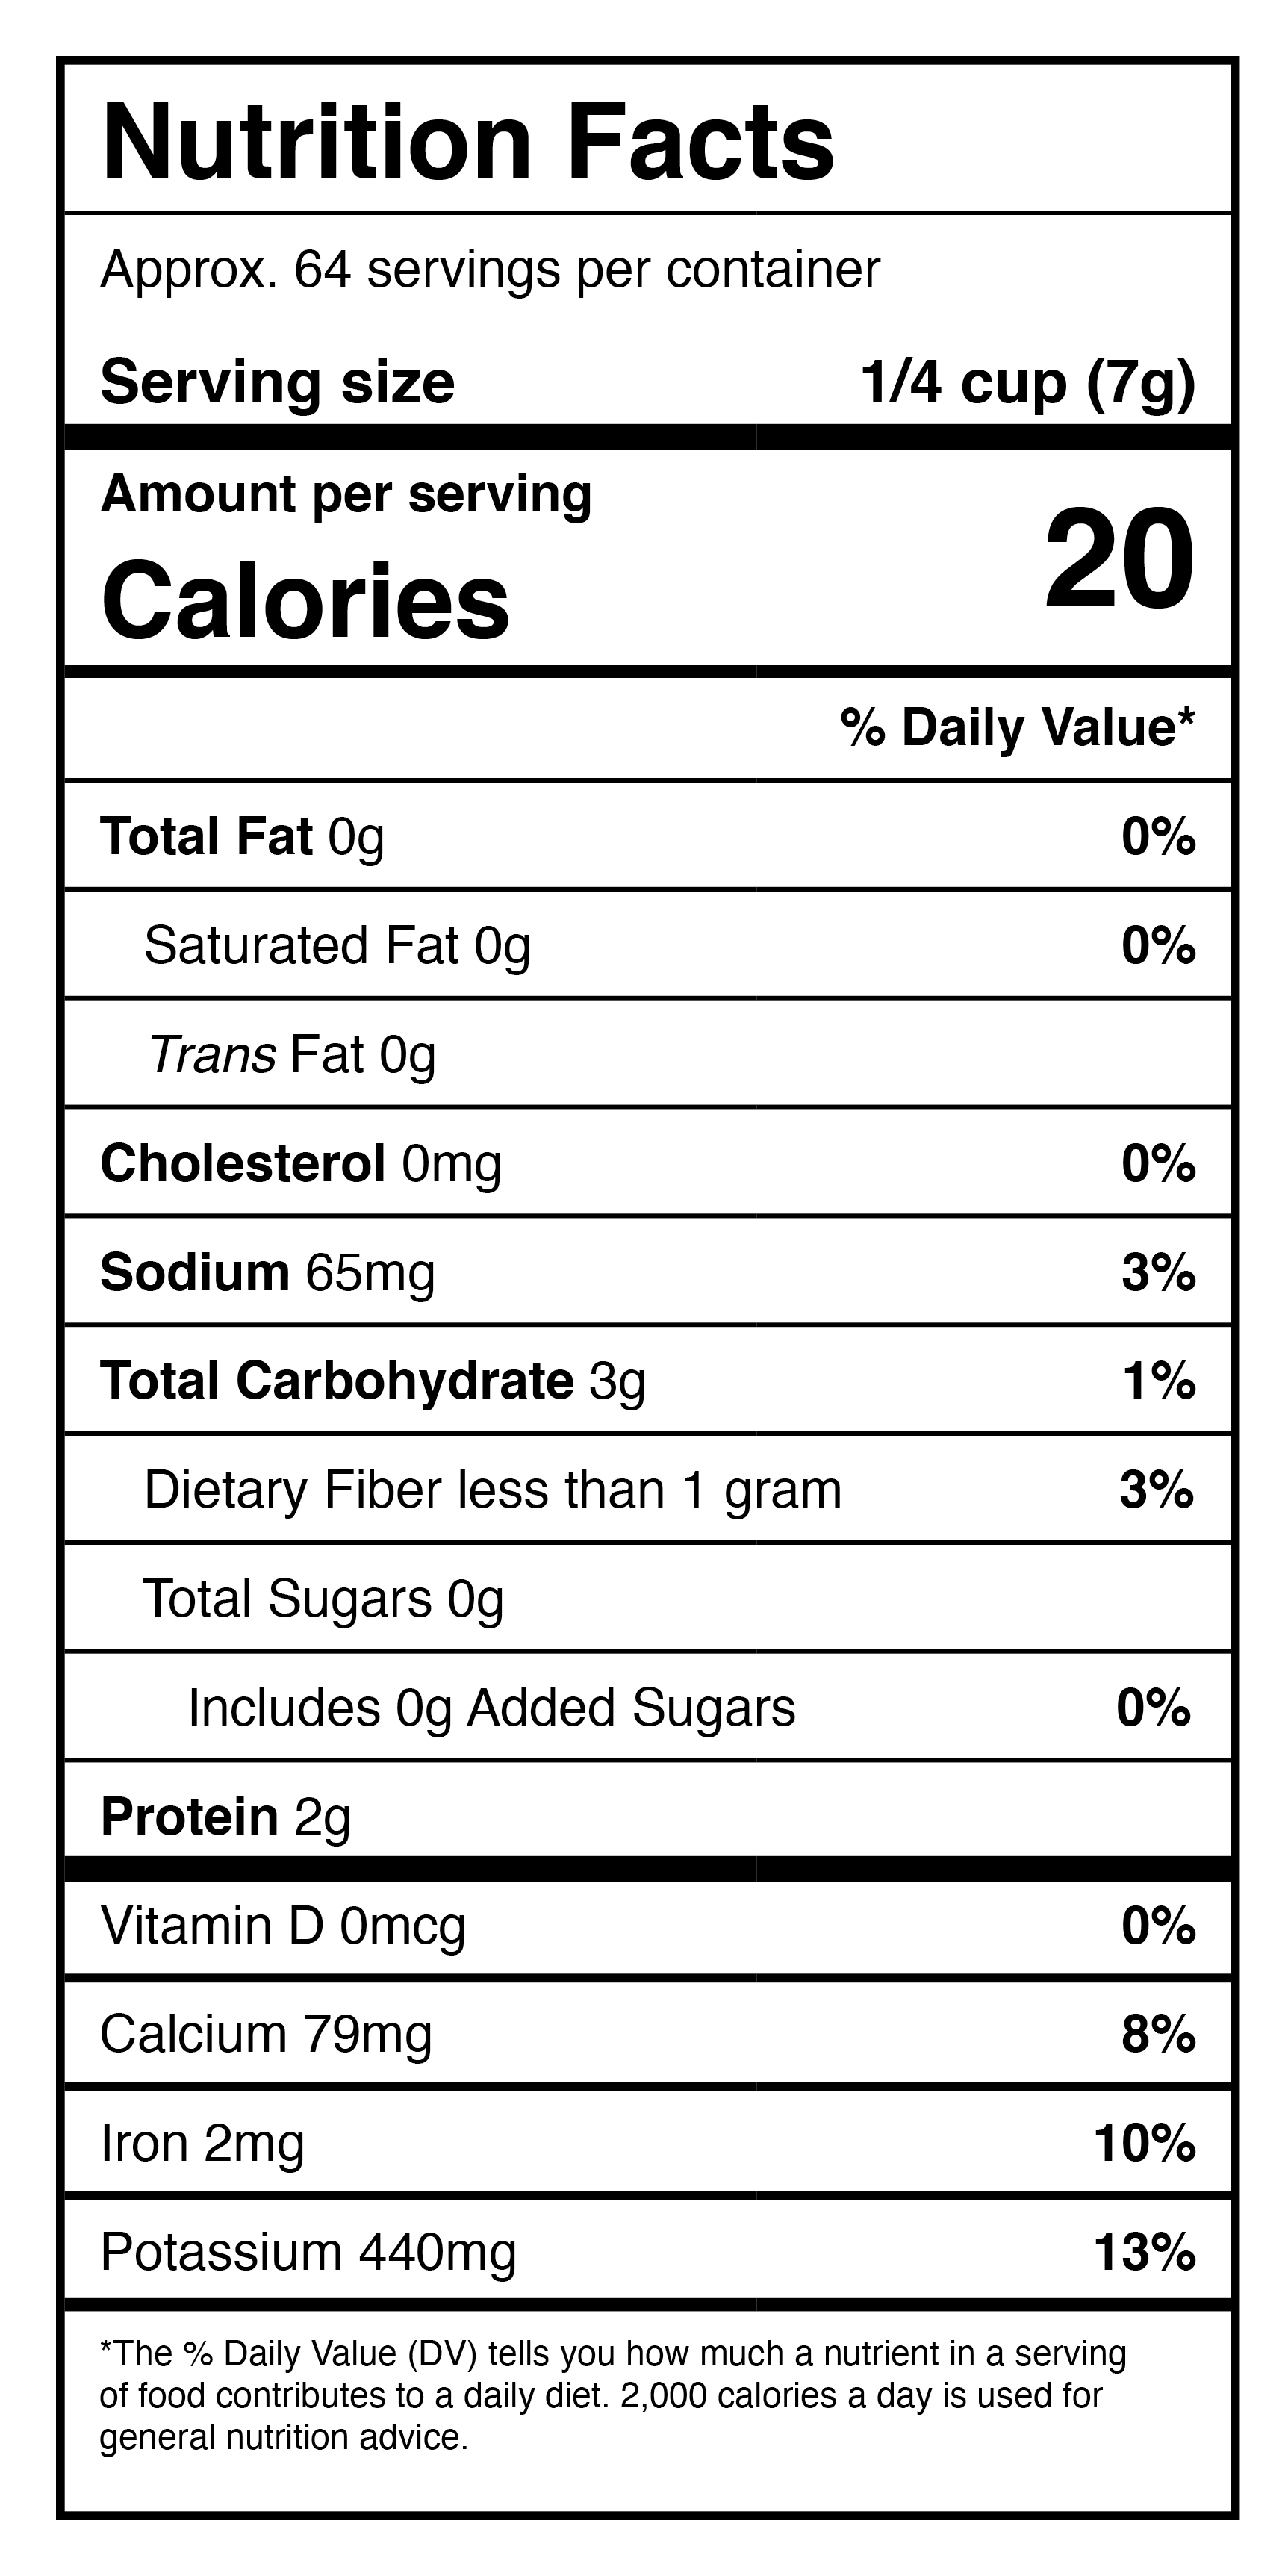 A nutrition label displaying nutrition facts for Harmony House Dried Spinach Flakes.